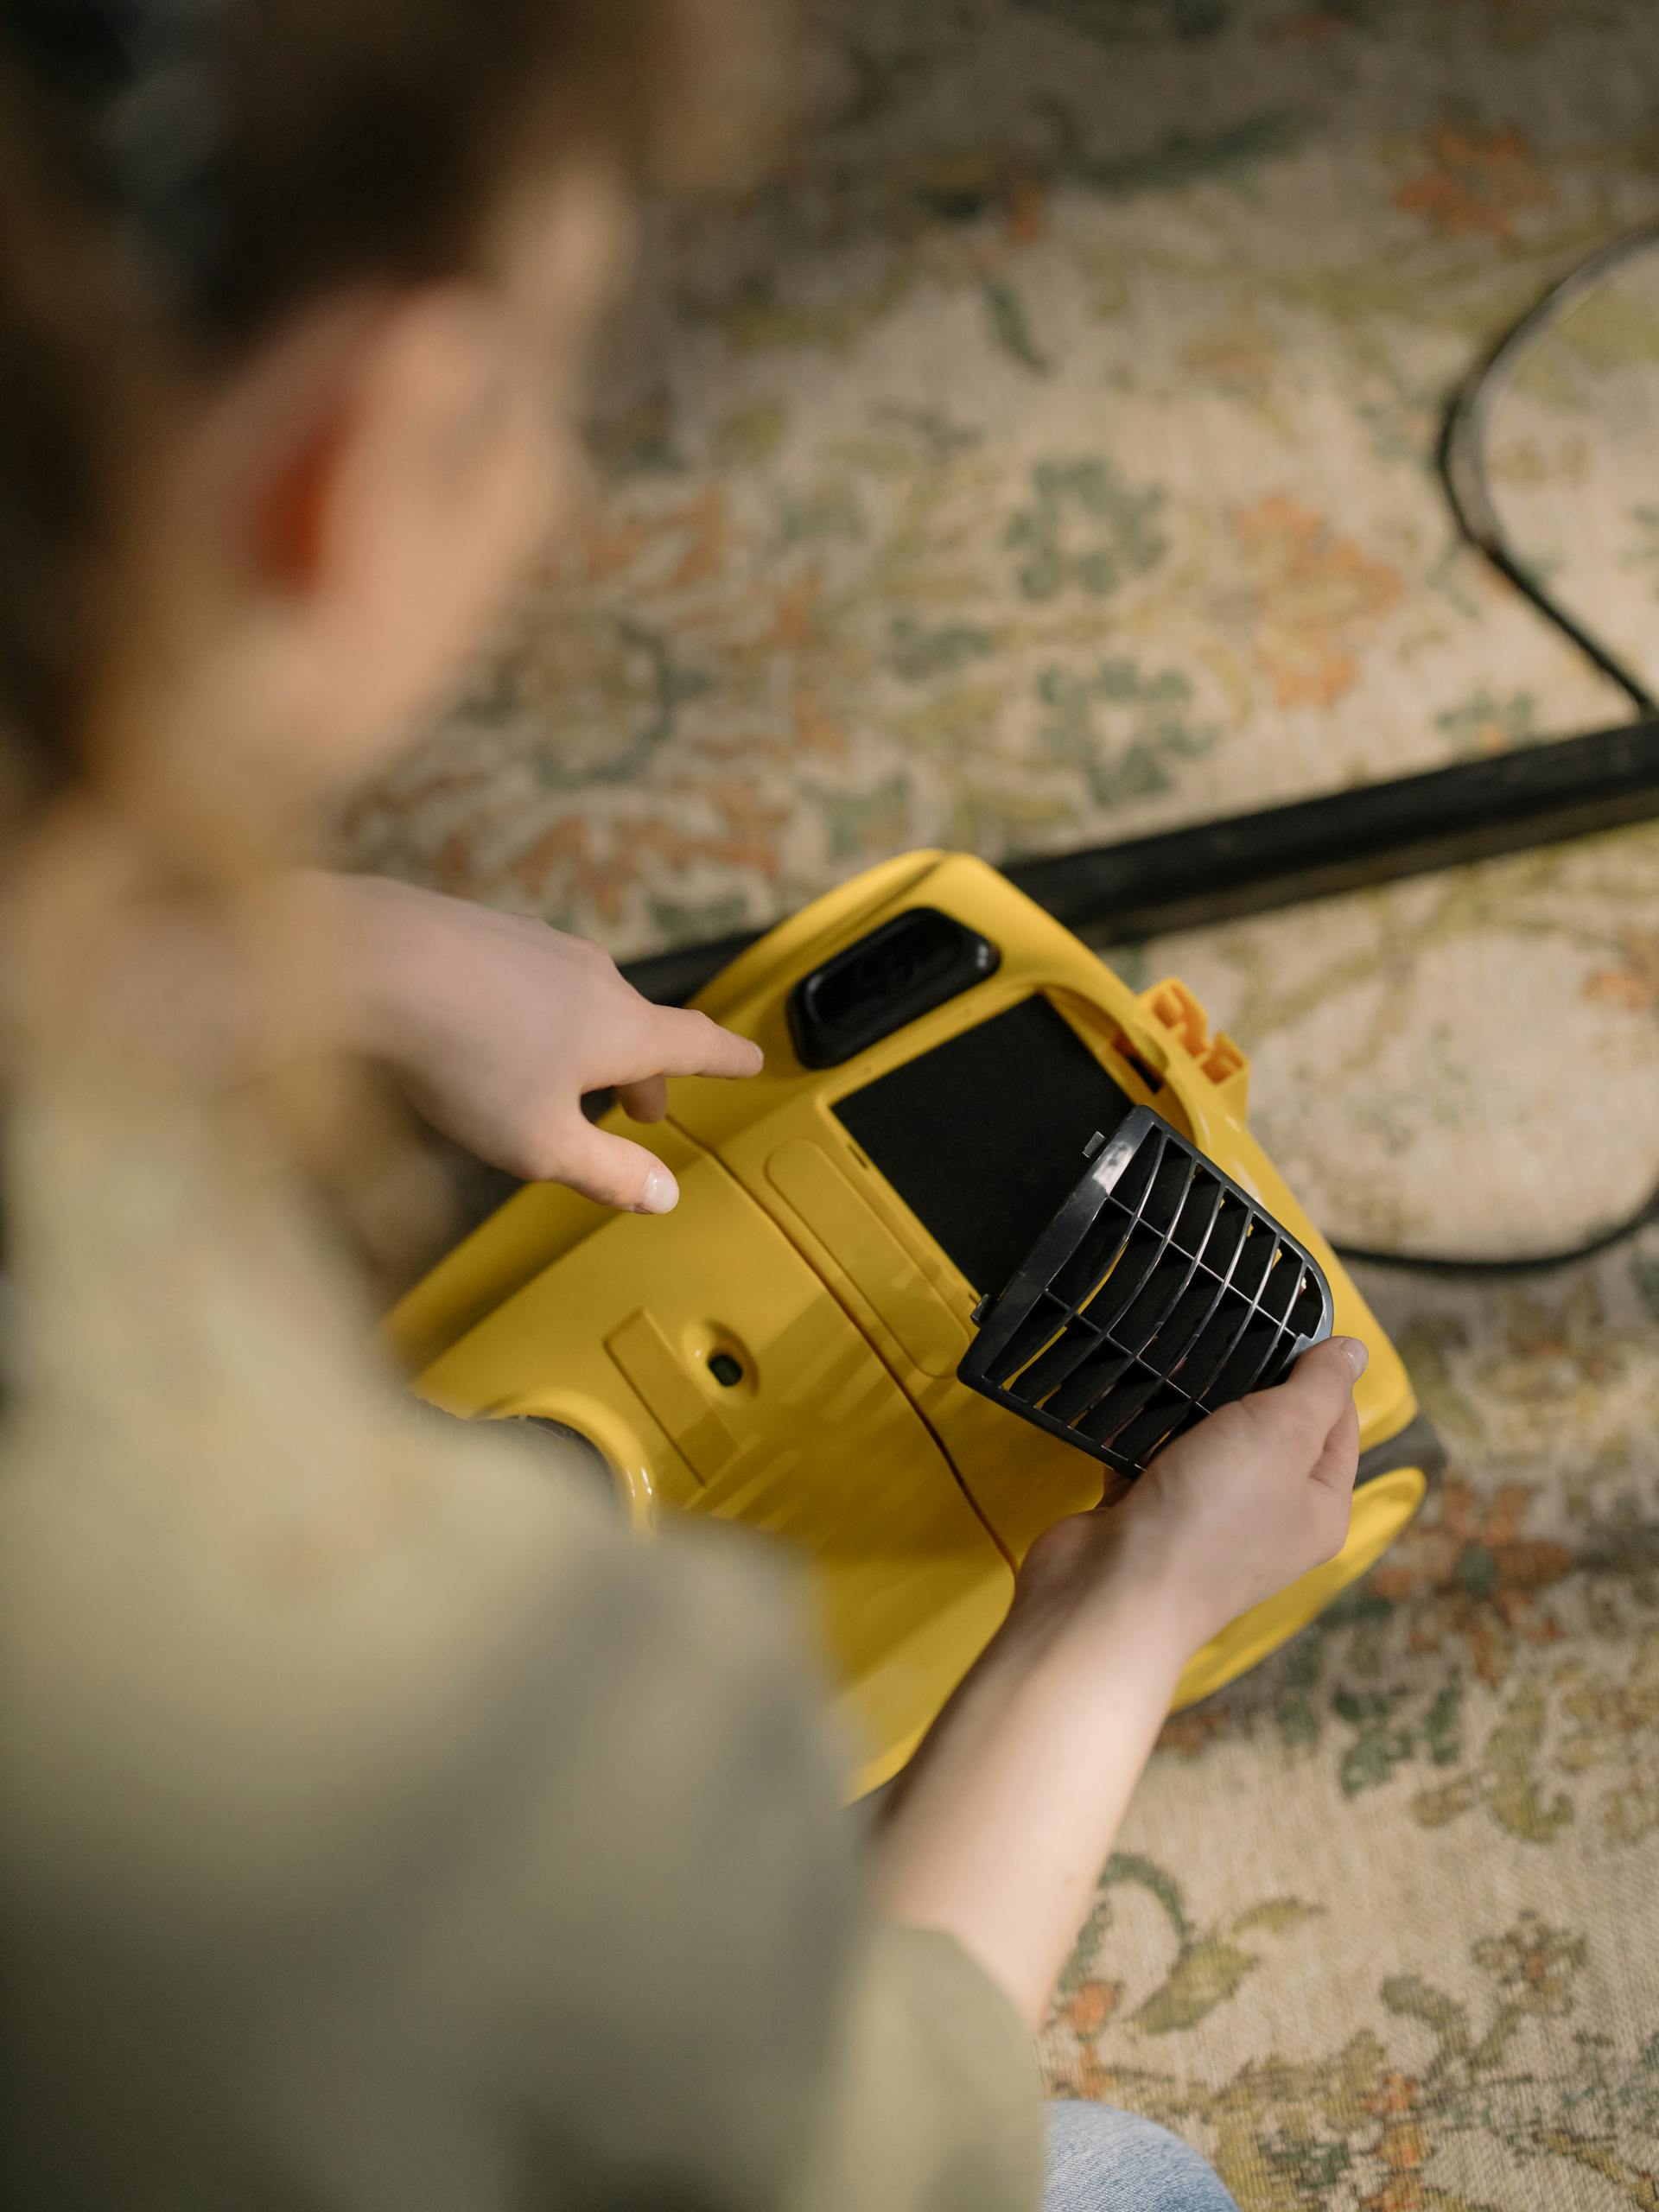 A woman holding a vacuum cleaner | Source: Pexels